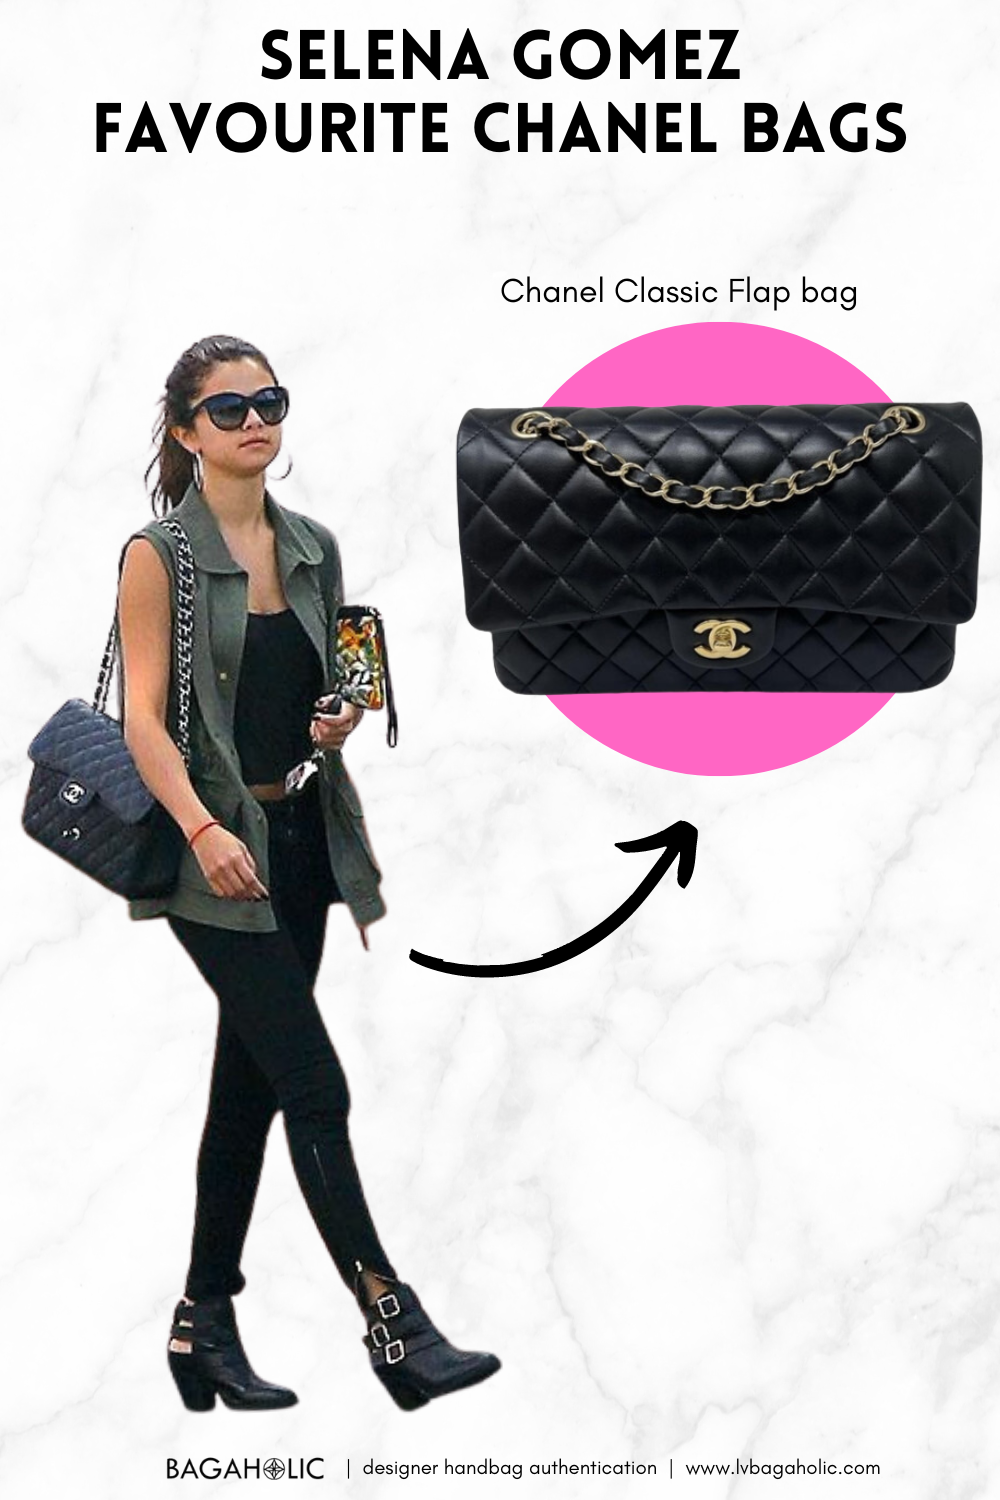 100 Celebs and Their Favorite Chanel Bags beyonce chanel boy bag celebs Part1  selena gomez chanel